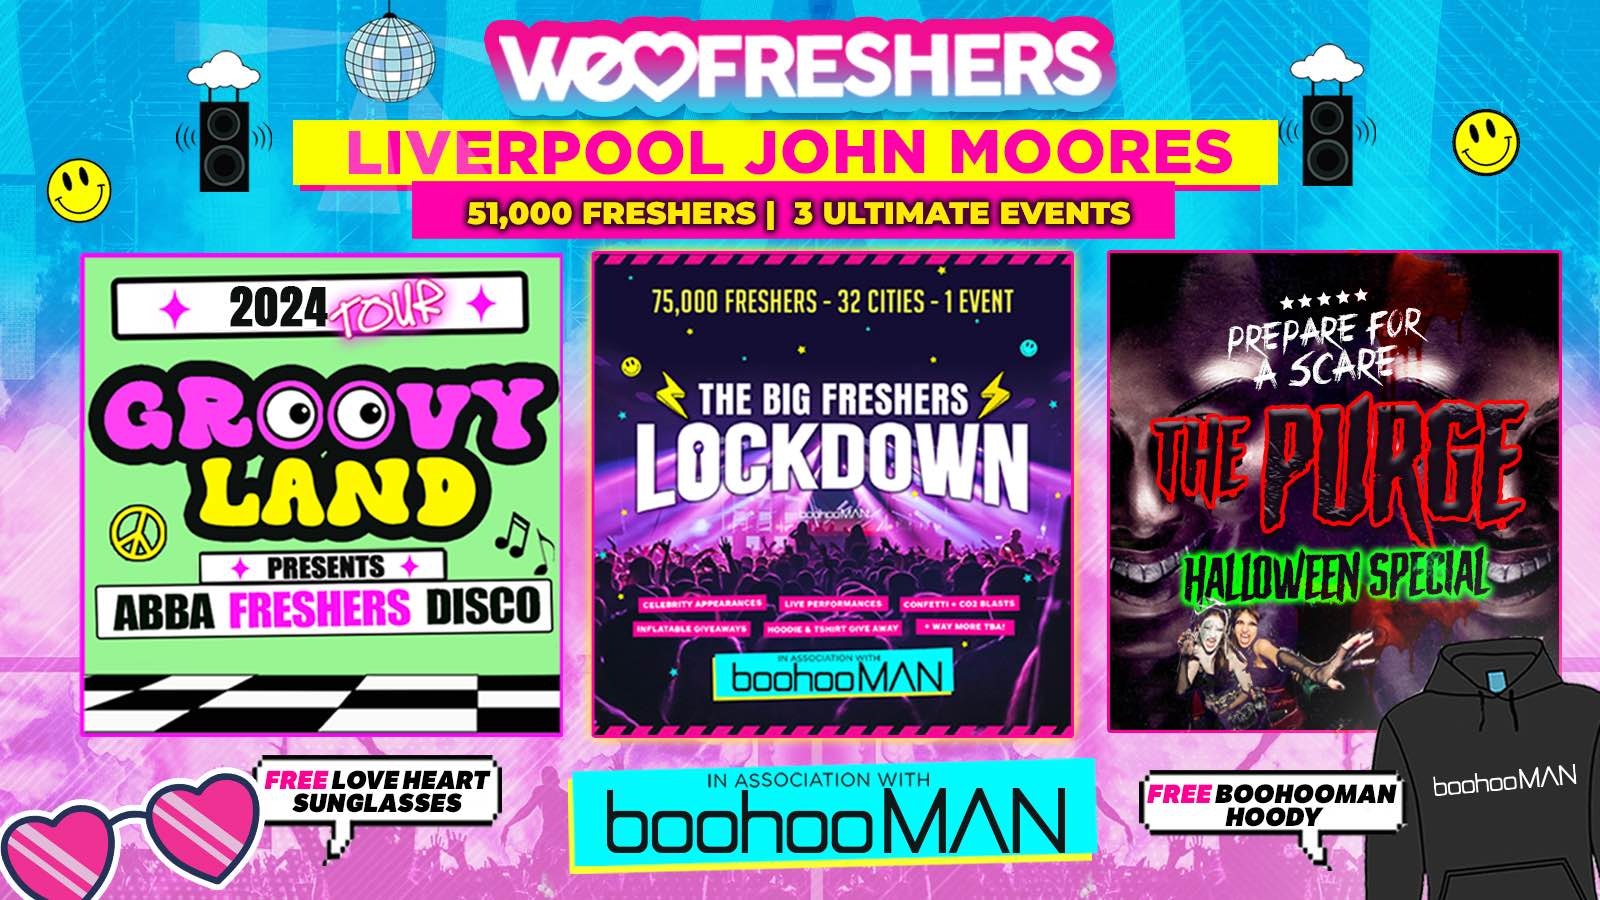 WE LOVE LIVERPOOL JOHN MOORE FRESHERS 2024 in association with boohooMAN – 3 EVENTS❗